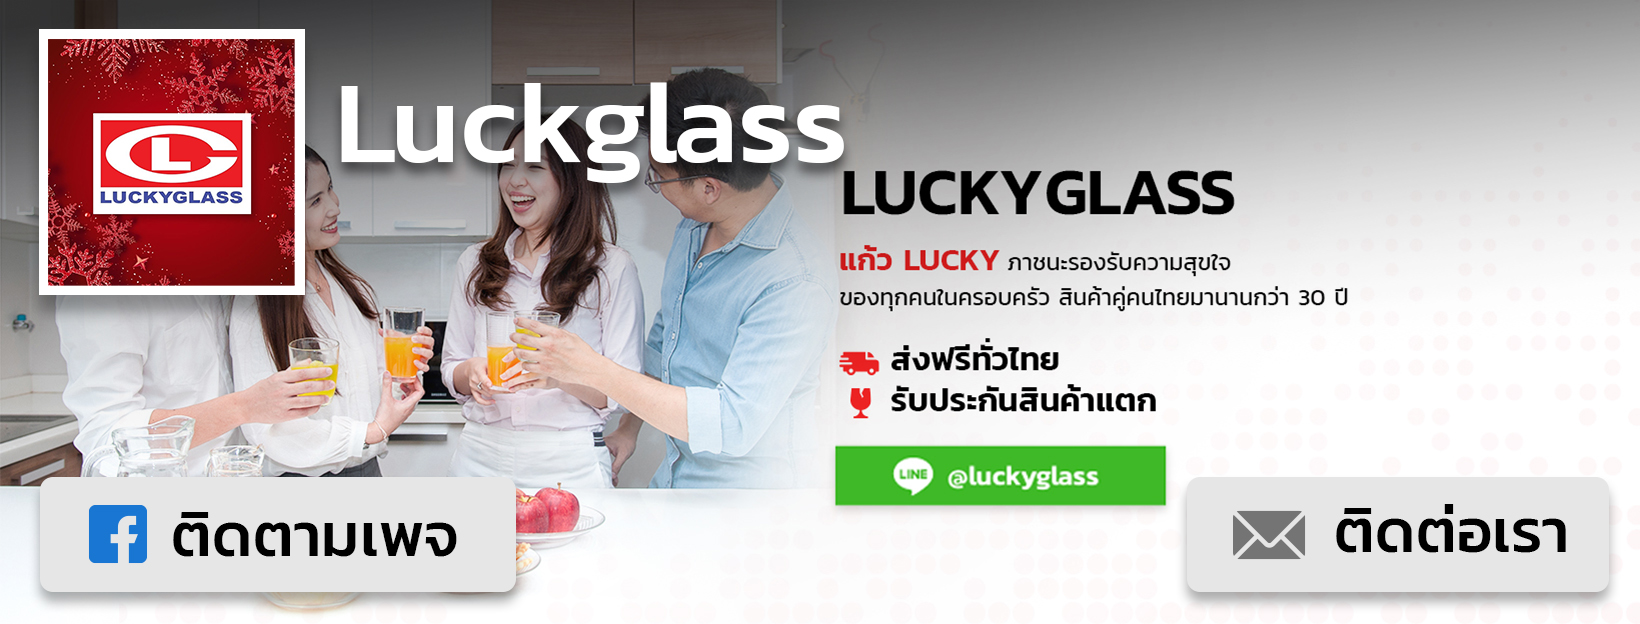 LUCKYGLASS FB Page